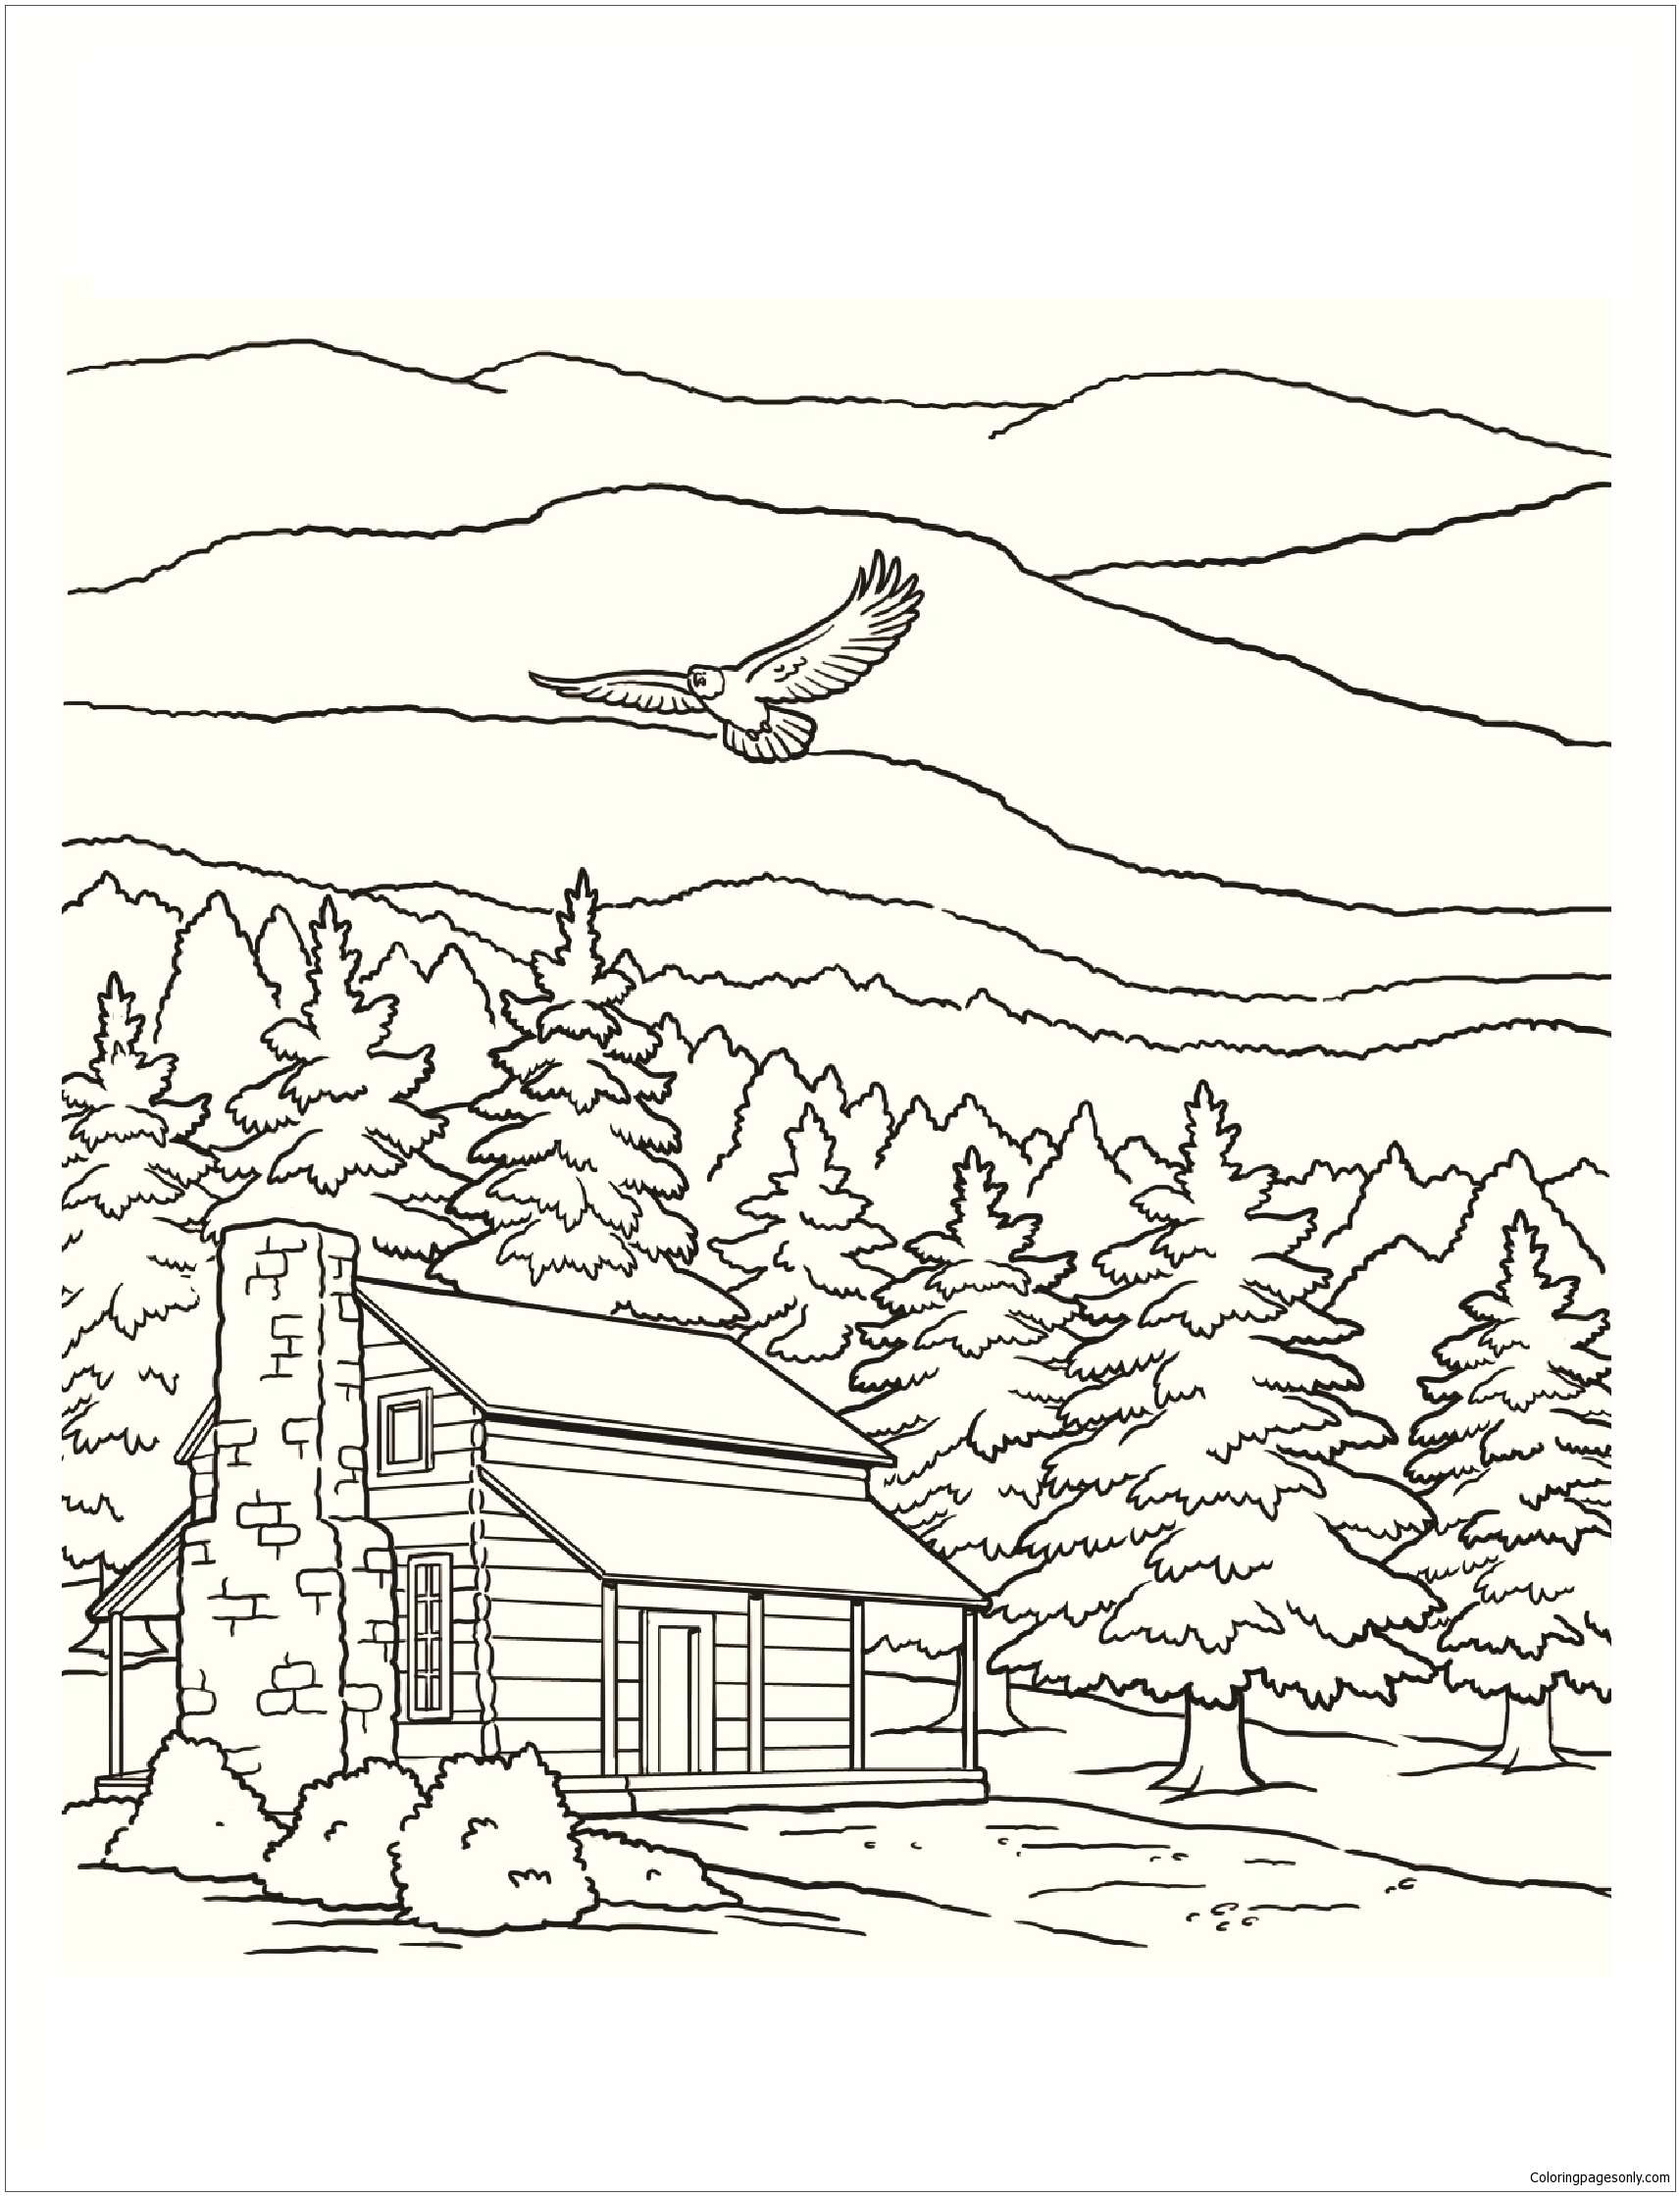 Smoky Mountains National Park Coloring Page Free Coloring Pages Online